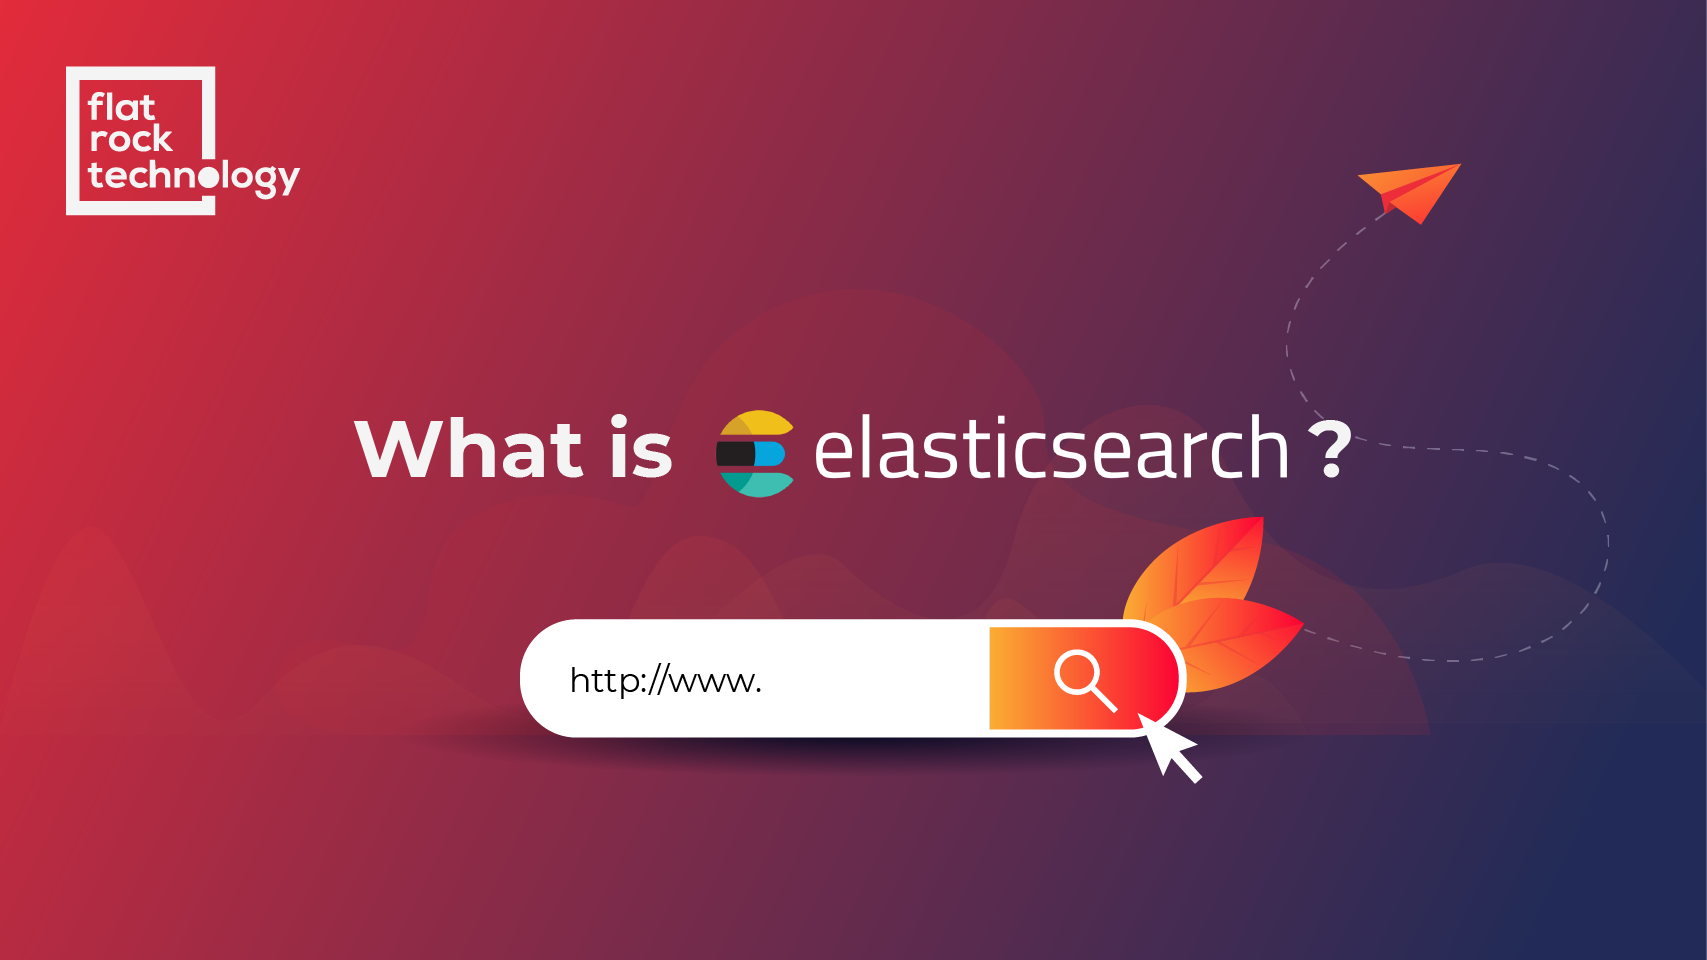 Elasticsearch: What it is, How it works, and what it's used for